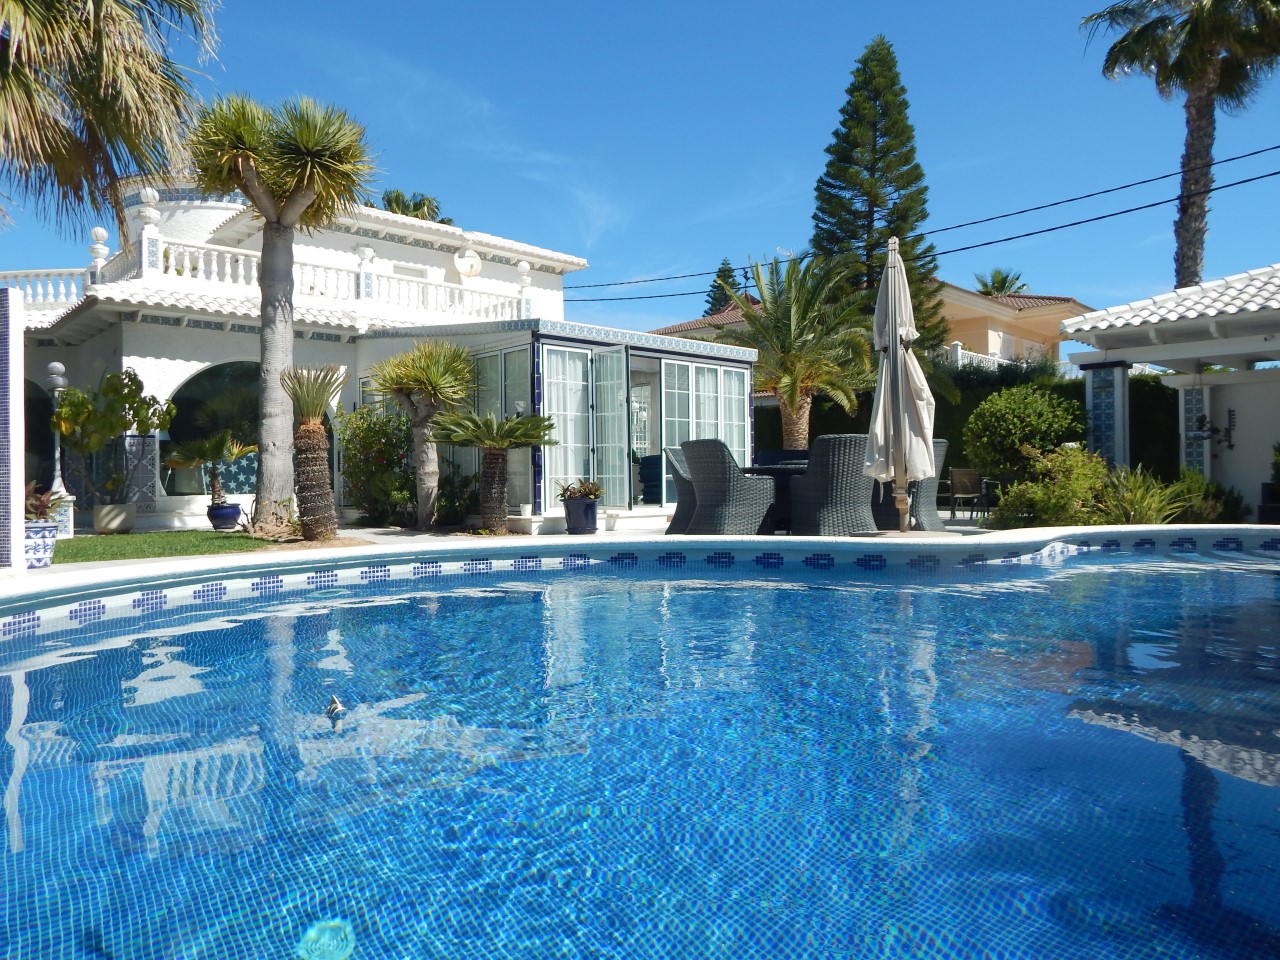 For sale: 4 bedroom house / villa in Cabo Roig